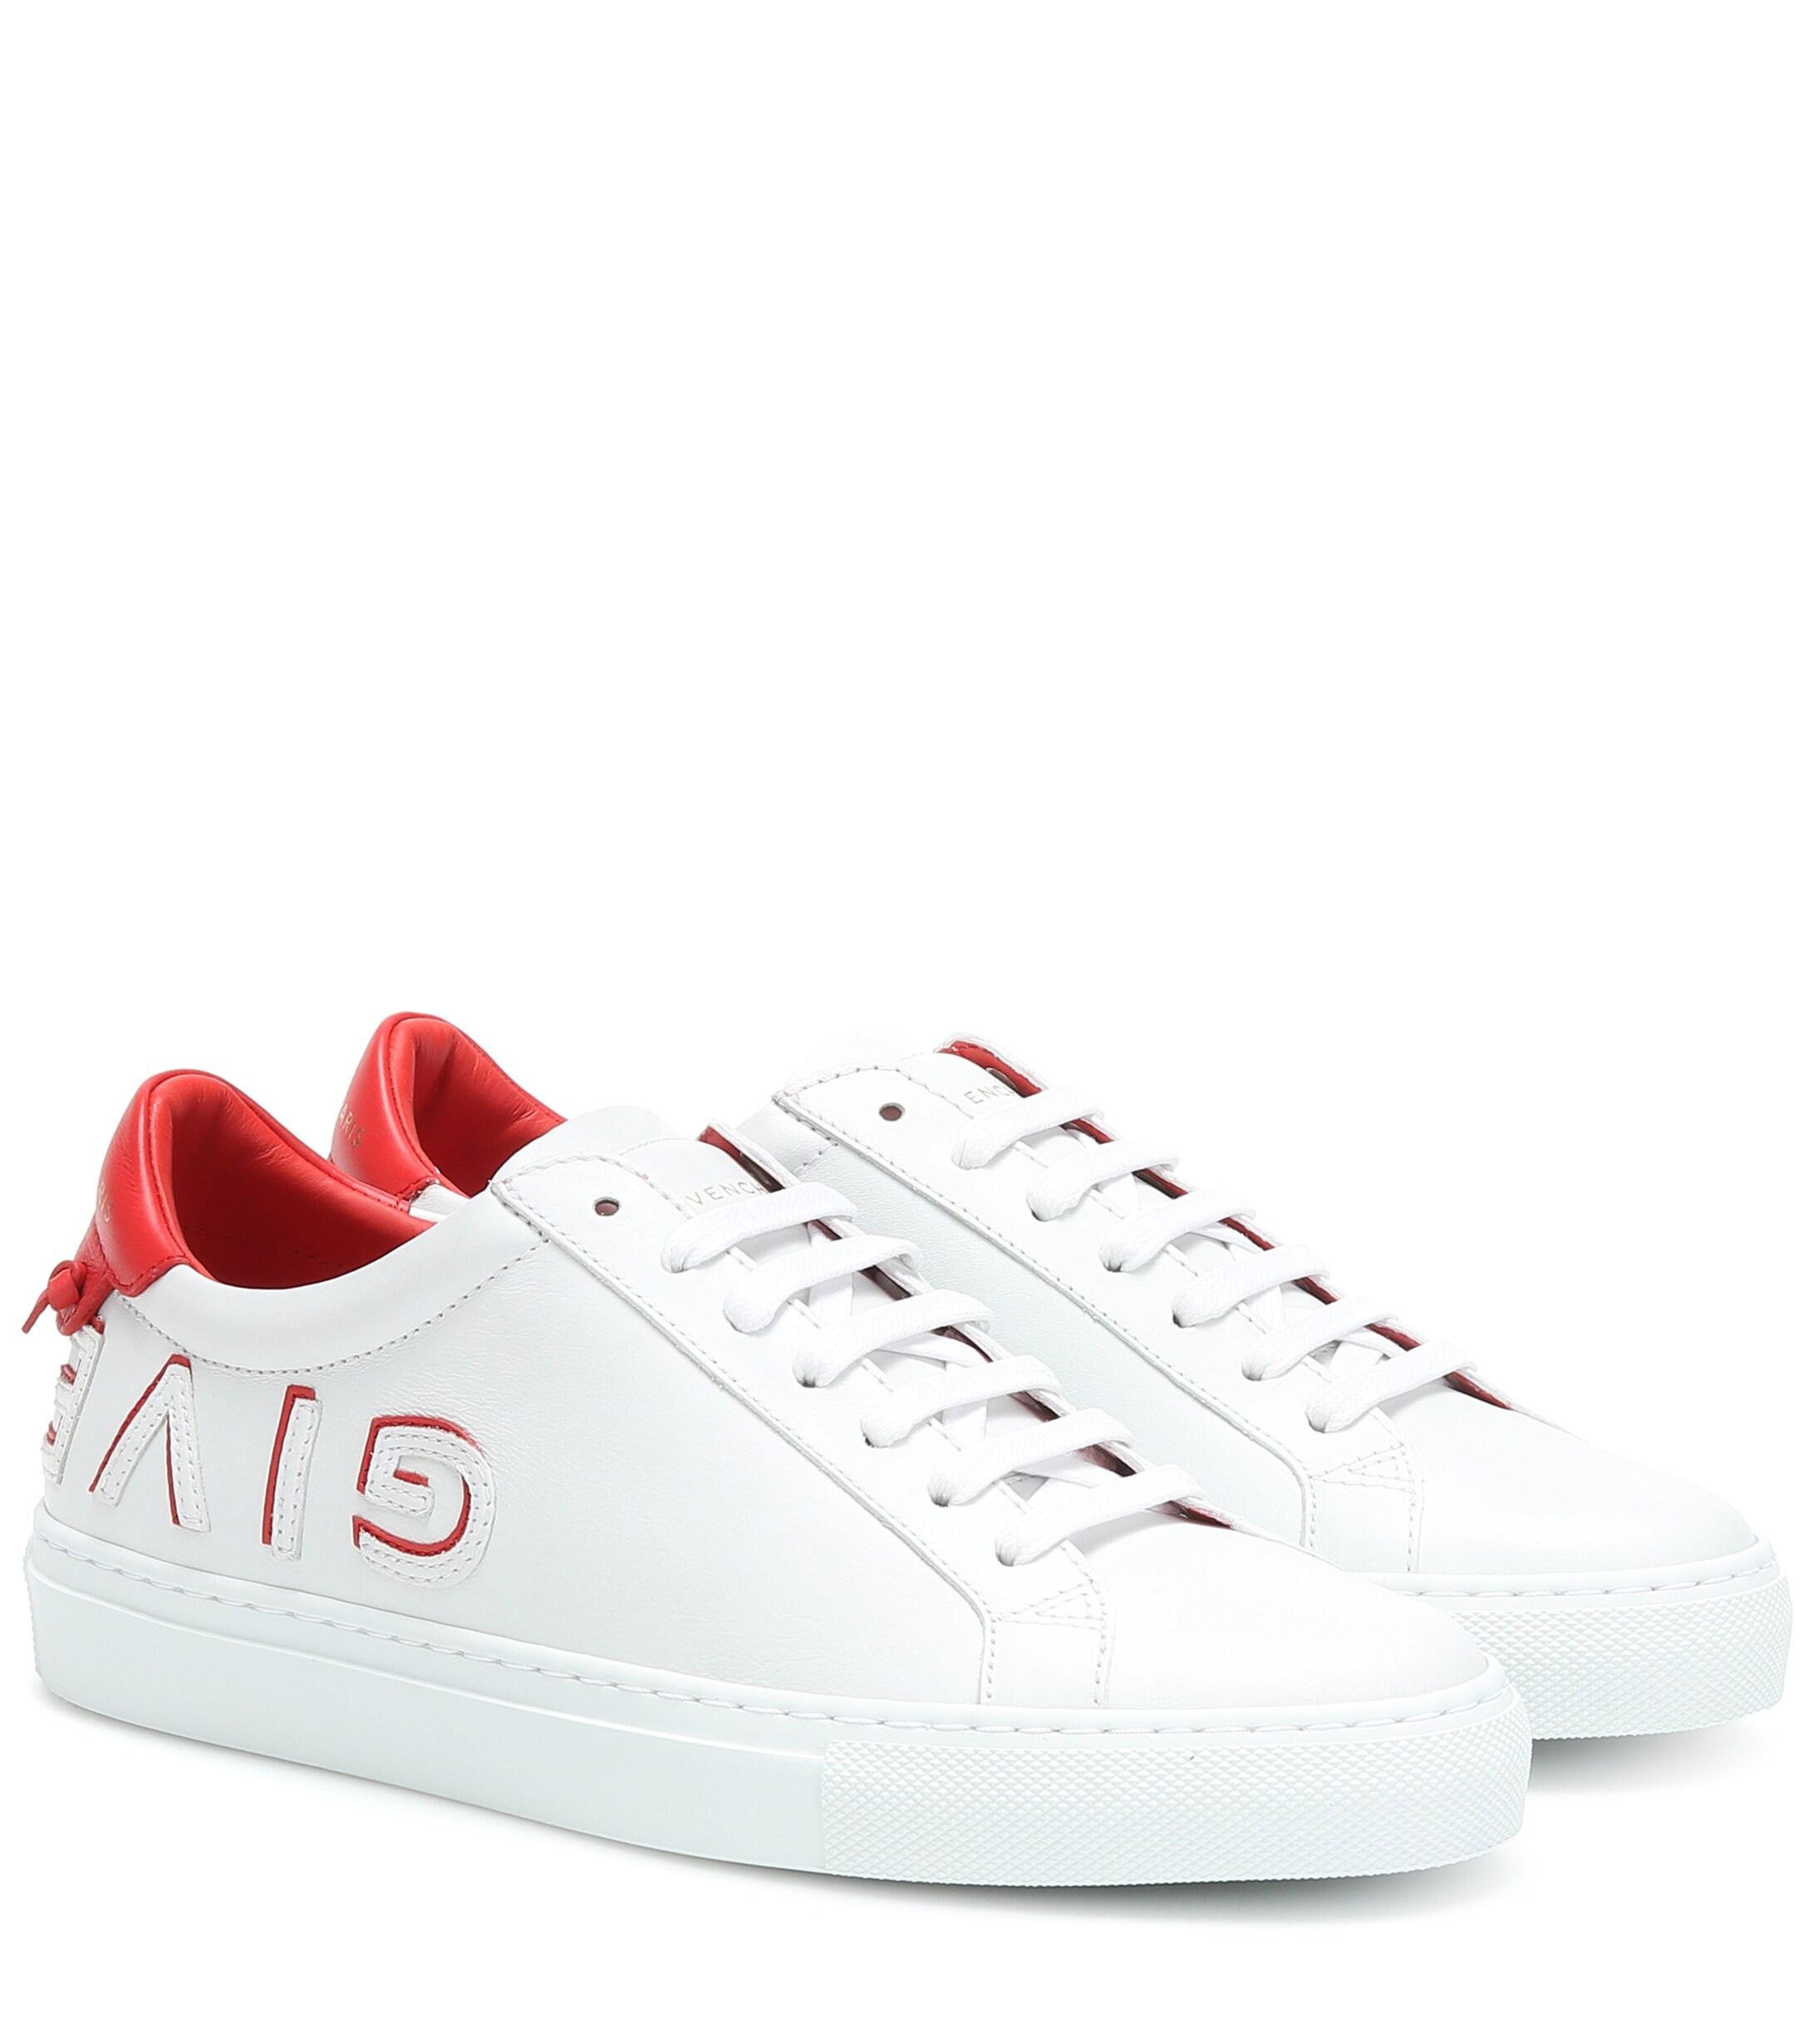 Givenchy Urban Knots Leather Sneakers in White,Red (White) - Lyst